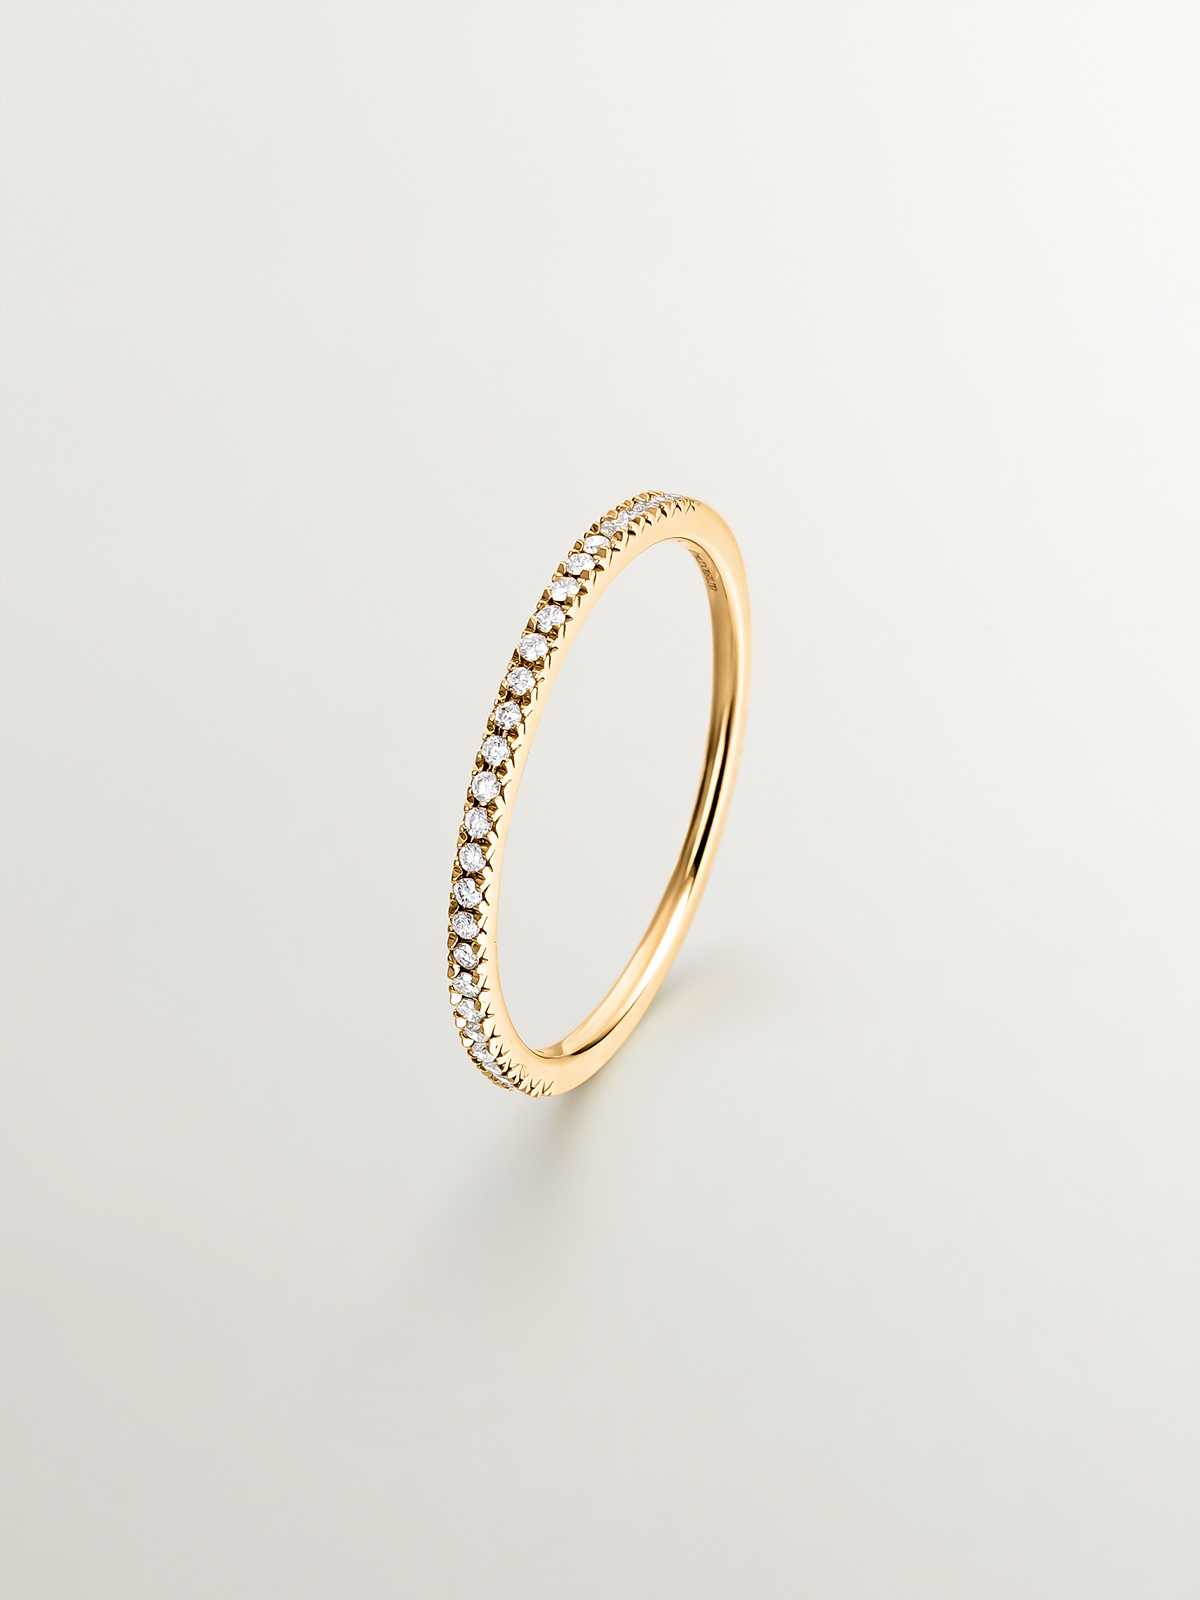 18K yellow gold ring with brilliant cut diamonds